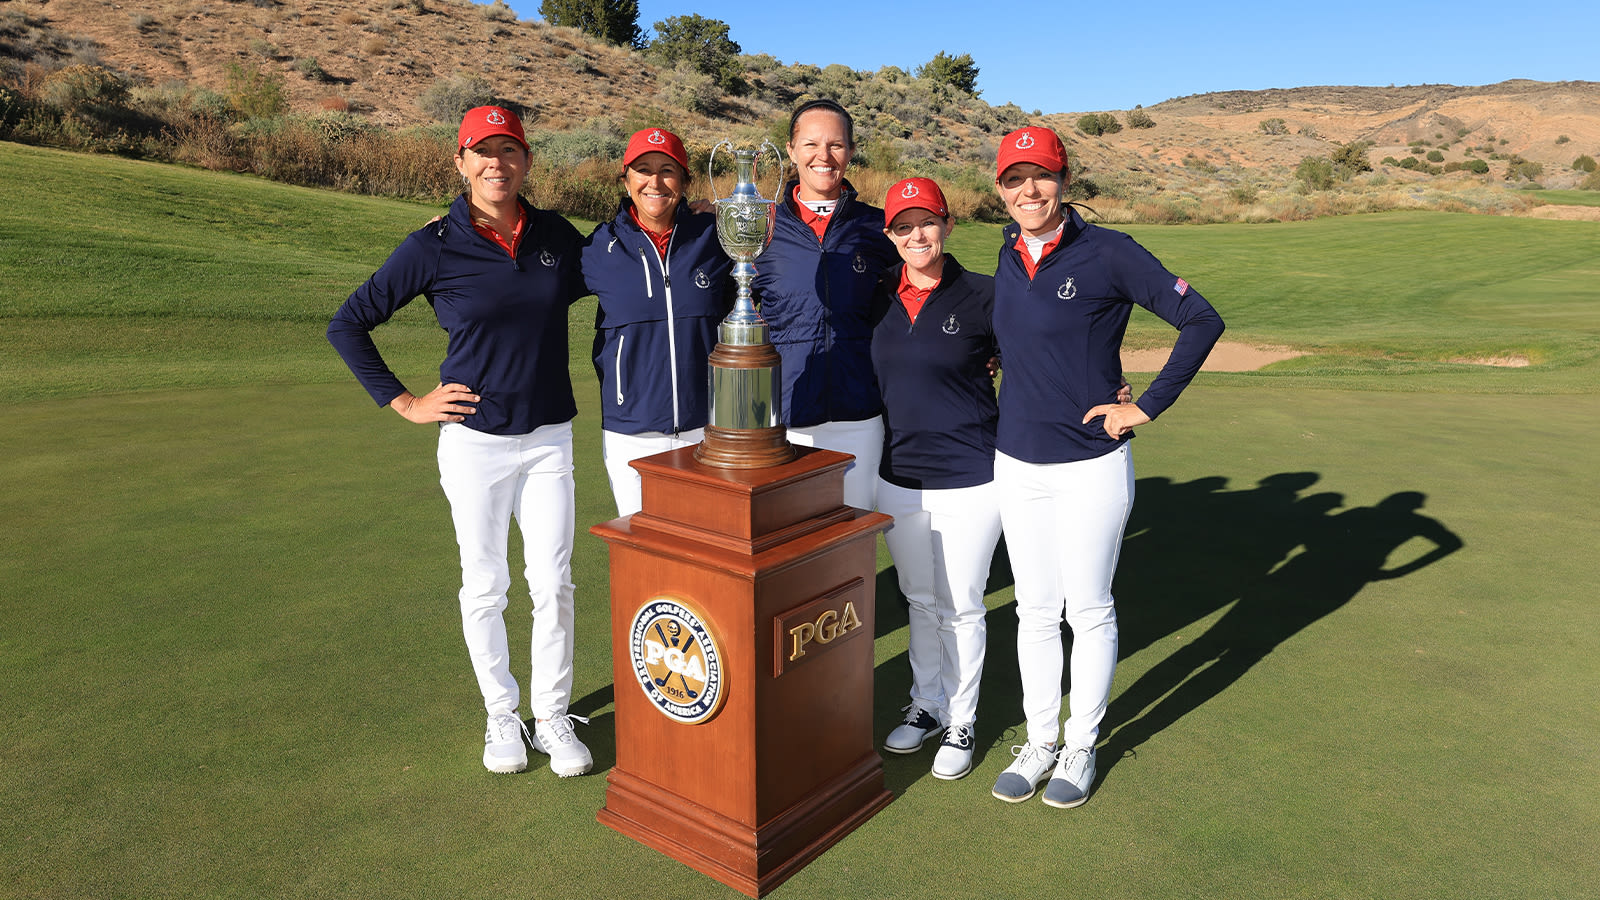 The U.S. Team poses for a photo with the Women's PGA Cup during the final round of the 2nd Women's PGA Cup at Twin Warriors Golf Club on Saturday, October 29, 2022 in Santa Ana Pueblo, New Mexico. (Photo by Sam Greenwood/PGA of America)